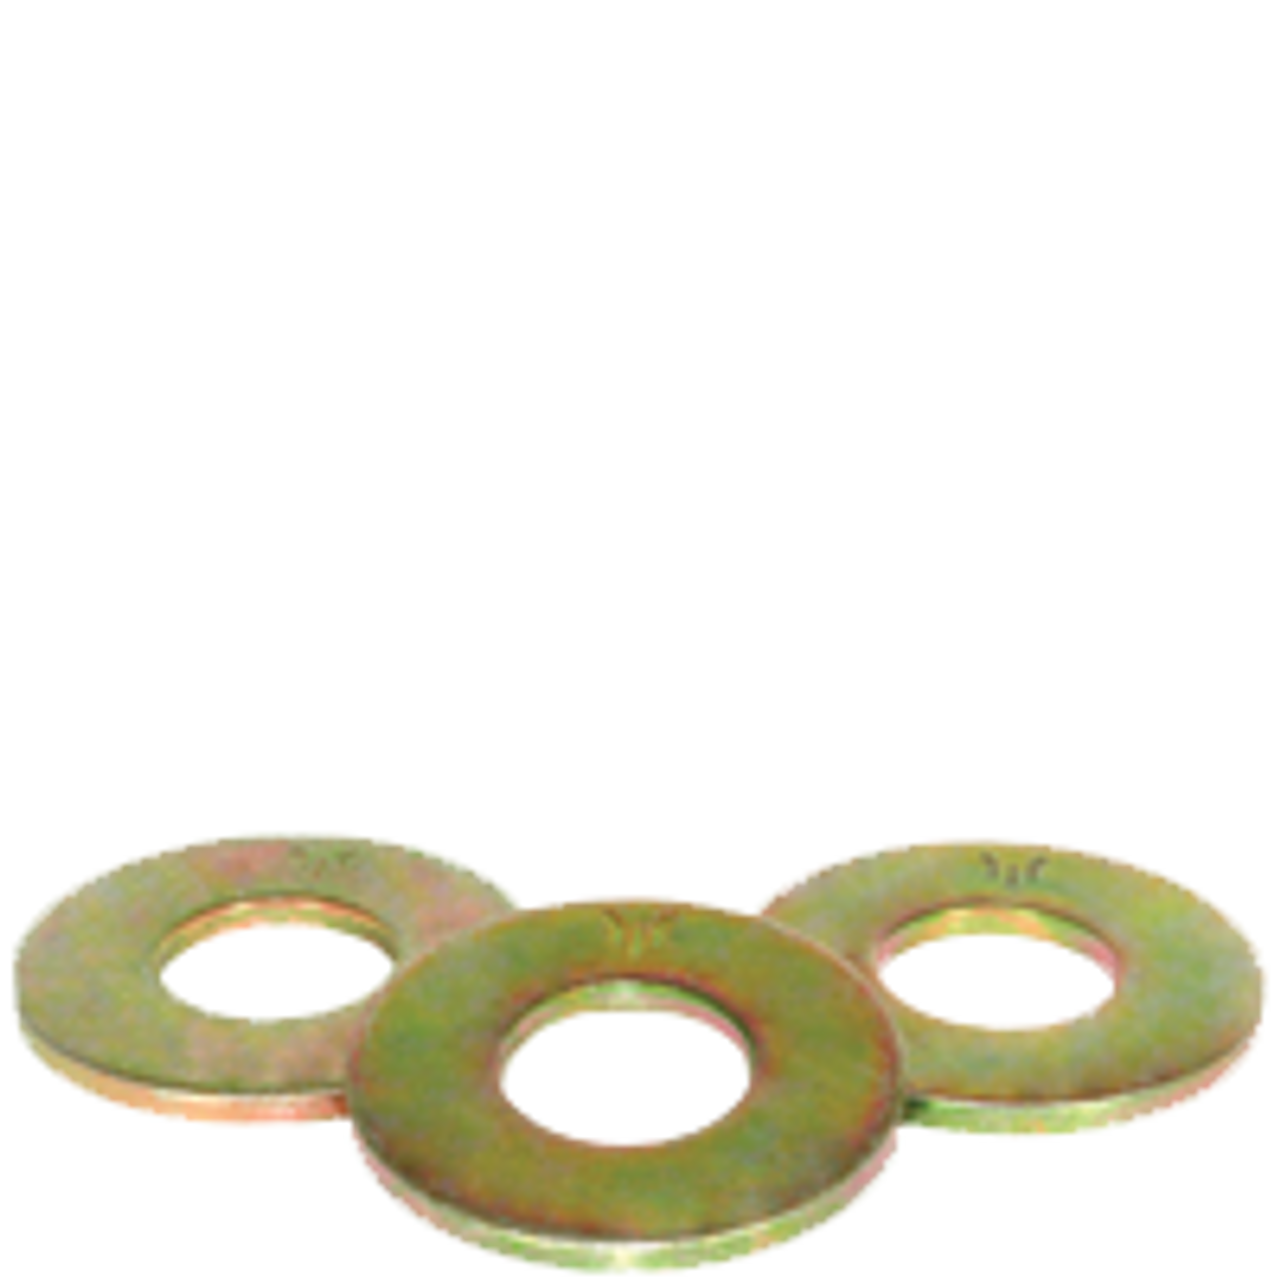 7/16 Copper Flat Washer Package Qty 100